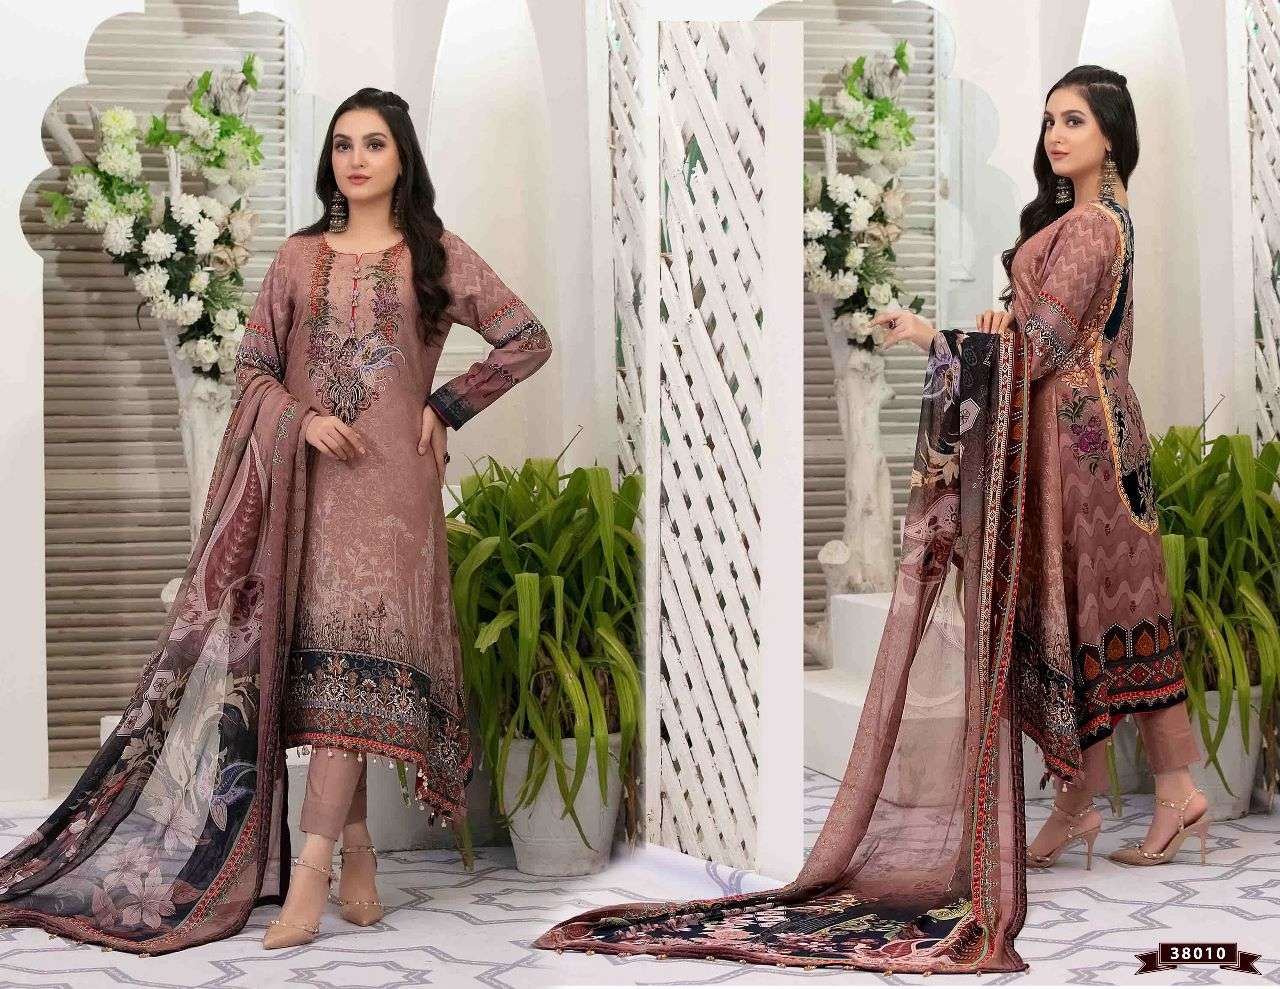 RAZIA SULTAN VOL-38 BY APANA COTTON 38001 TO 38010 SERIES BEAUTIFUL SUITS COLORFUL STYLISH FANCY CASUAL WEAR & ETHNIC WEAR COTTON DRESSES AT WHOLESALE PRICE